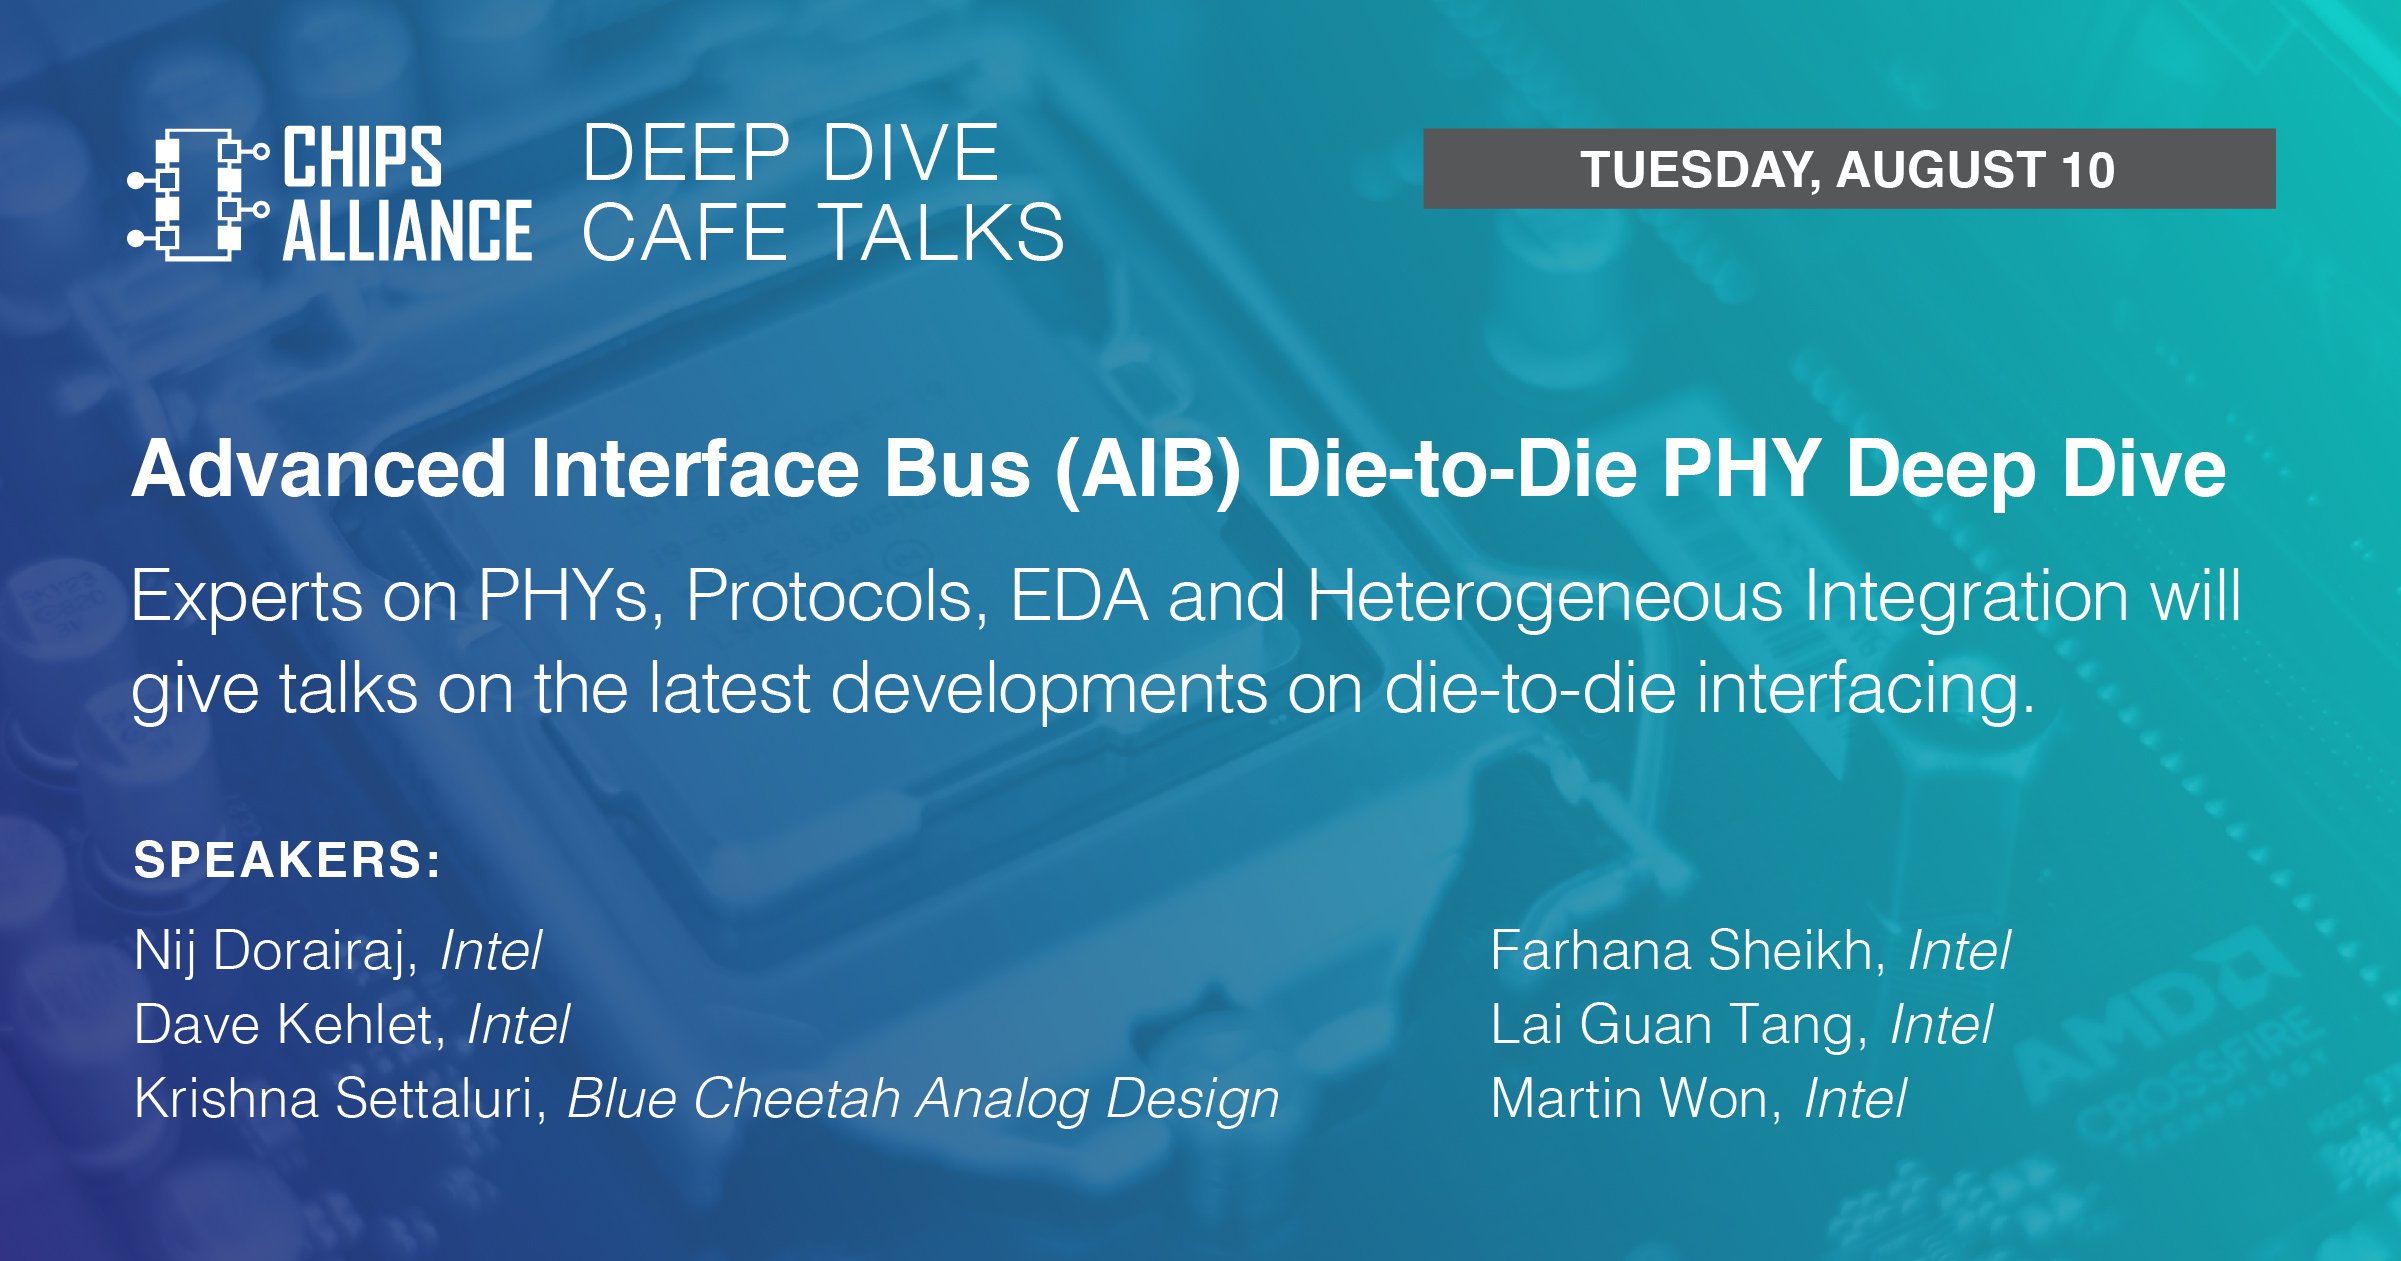 CHIPS Alliance Deep Dive Cafe Talks: AIB Deep Dive + Opportunities Presented By Intel featured image